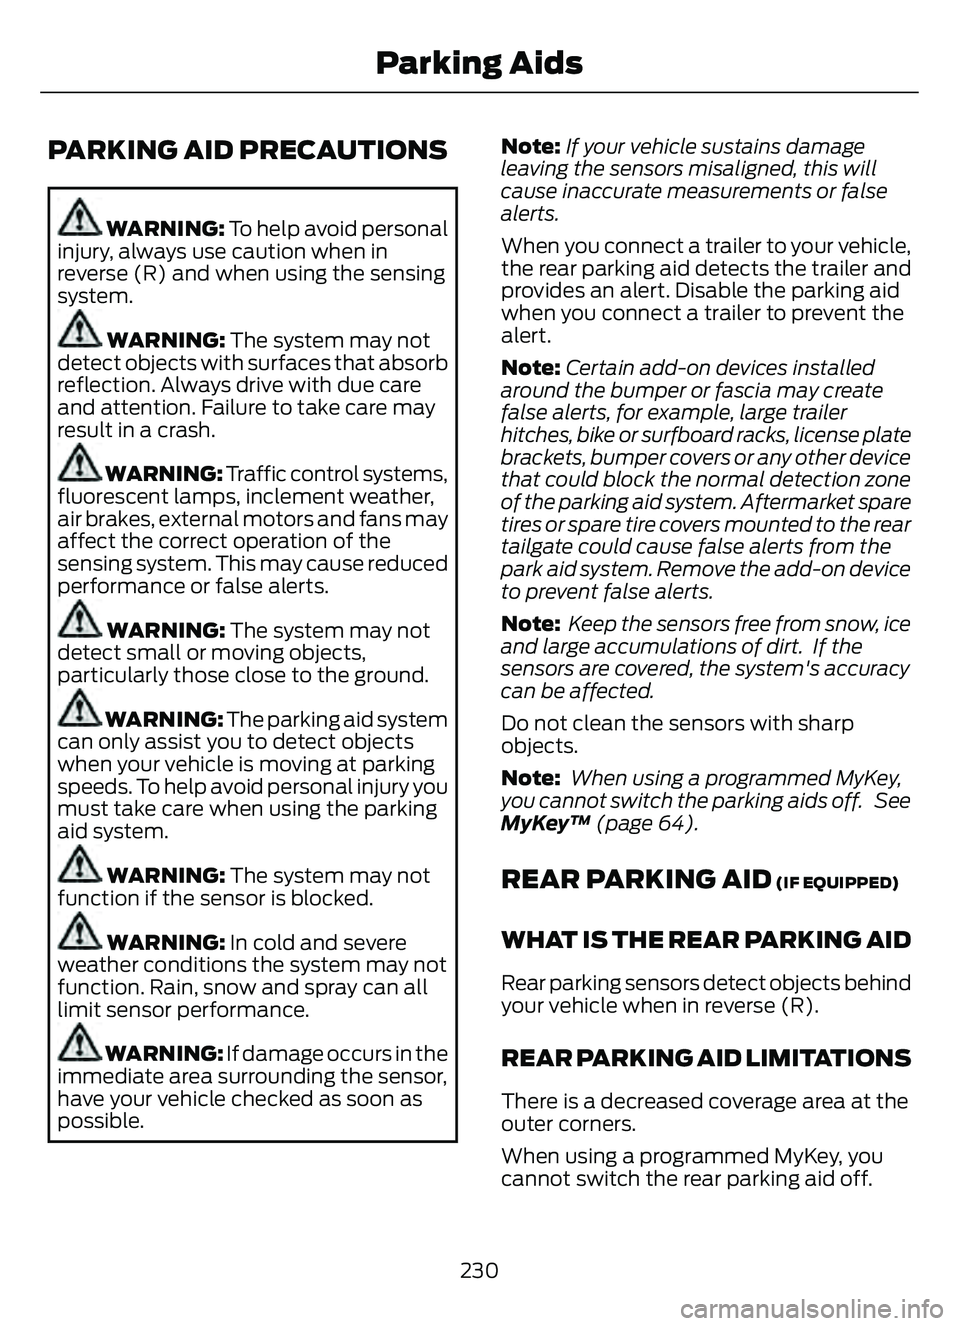 FORD ESCAPE 2022  Owners Manual PARKING AID PRECAUTIONS
WARNING: To help avoid personal
injury, always use caution when in
reverse (R) and when using the sensing
system.
WARNING: The system may not
detect objects with surfaces that 